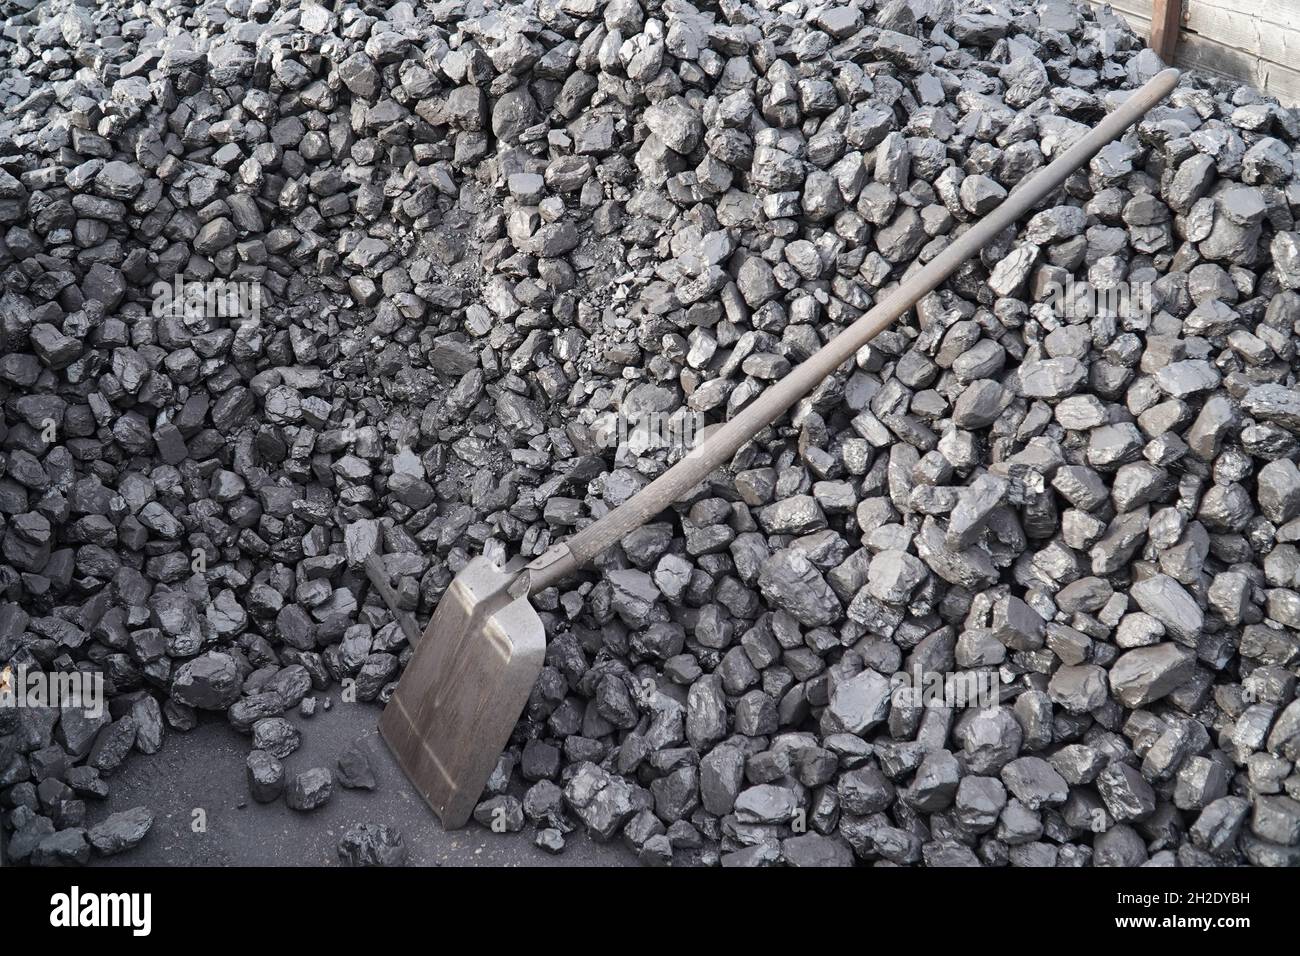 A coal shovel lies on a pile of hard coal necessary to fire an old steam locomotive in the railroad station of Bruchhausen Vilsen, Germany Stock Photo